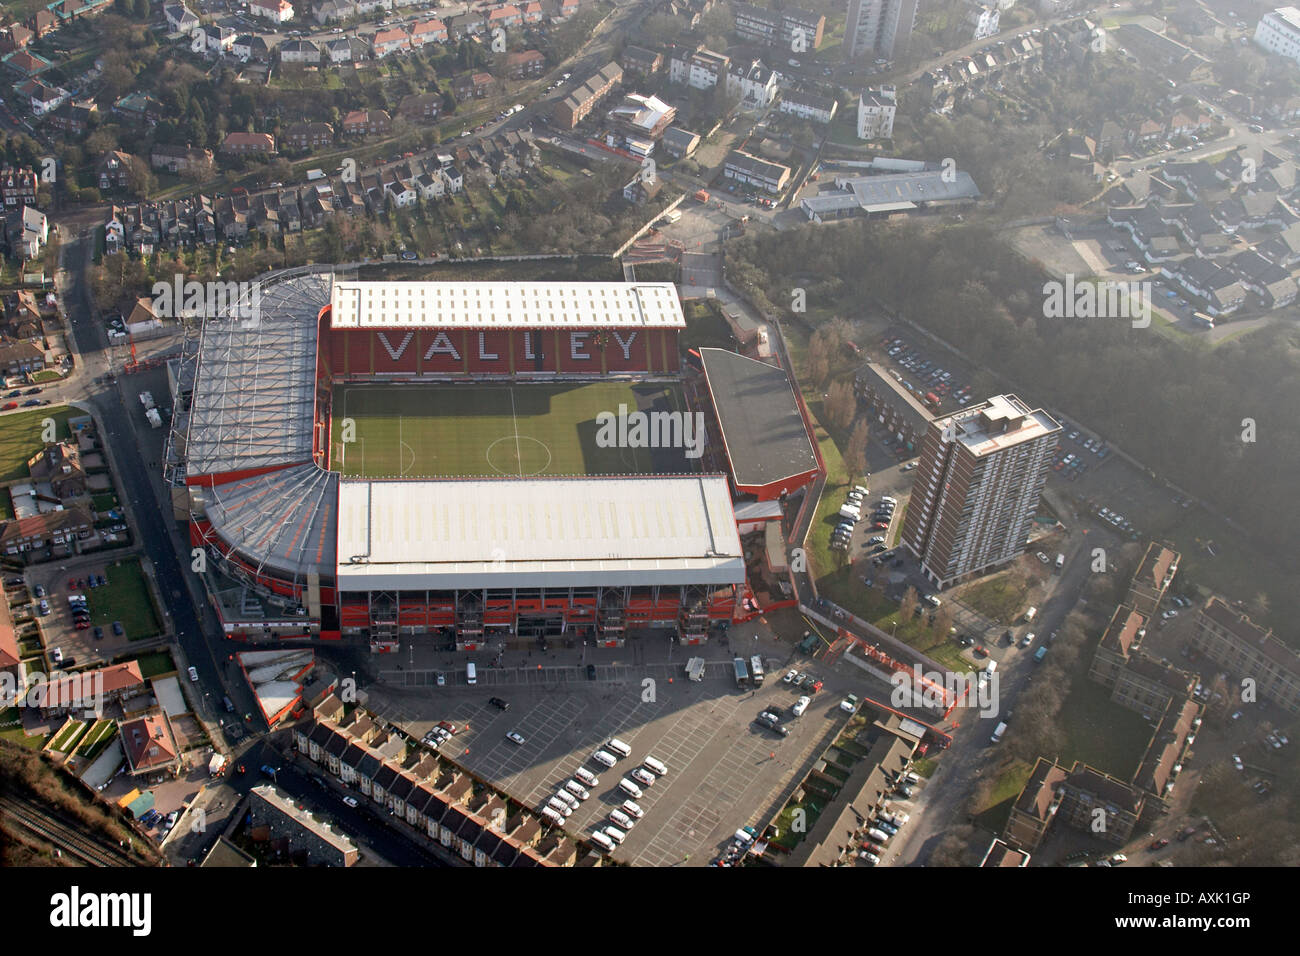 Charlton Athletic Stadium High Resolution Stock Photography and Images